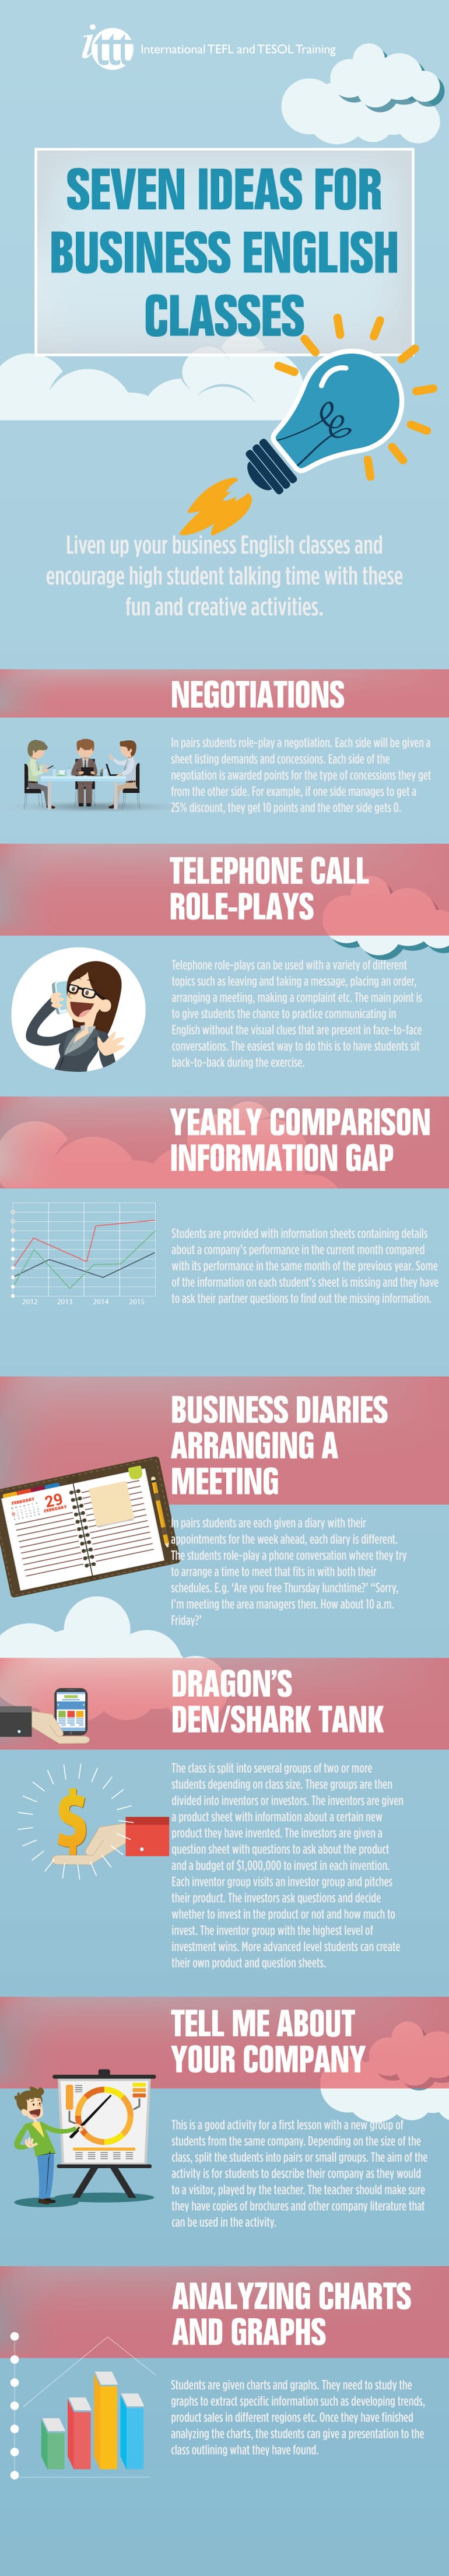 Infographic 7 ideas for business English classes